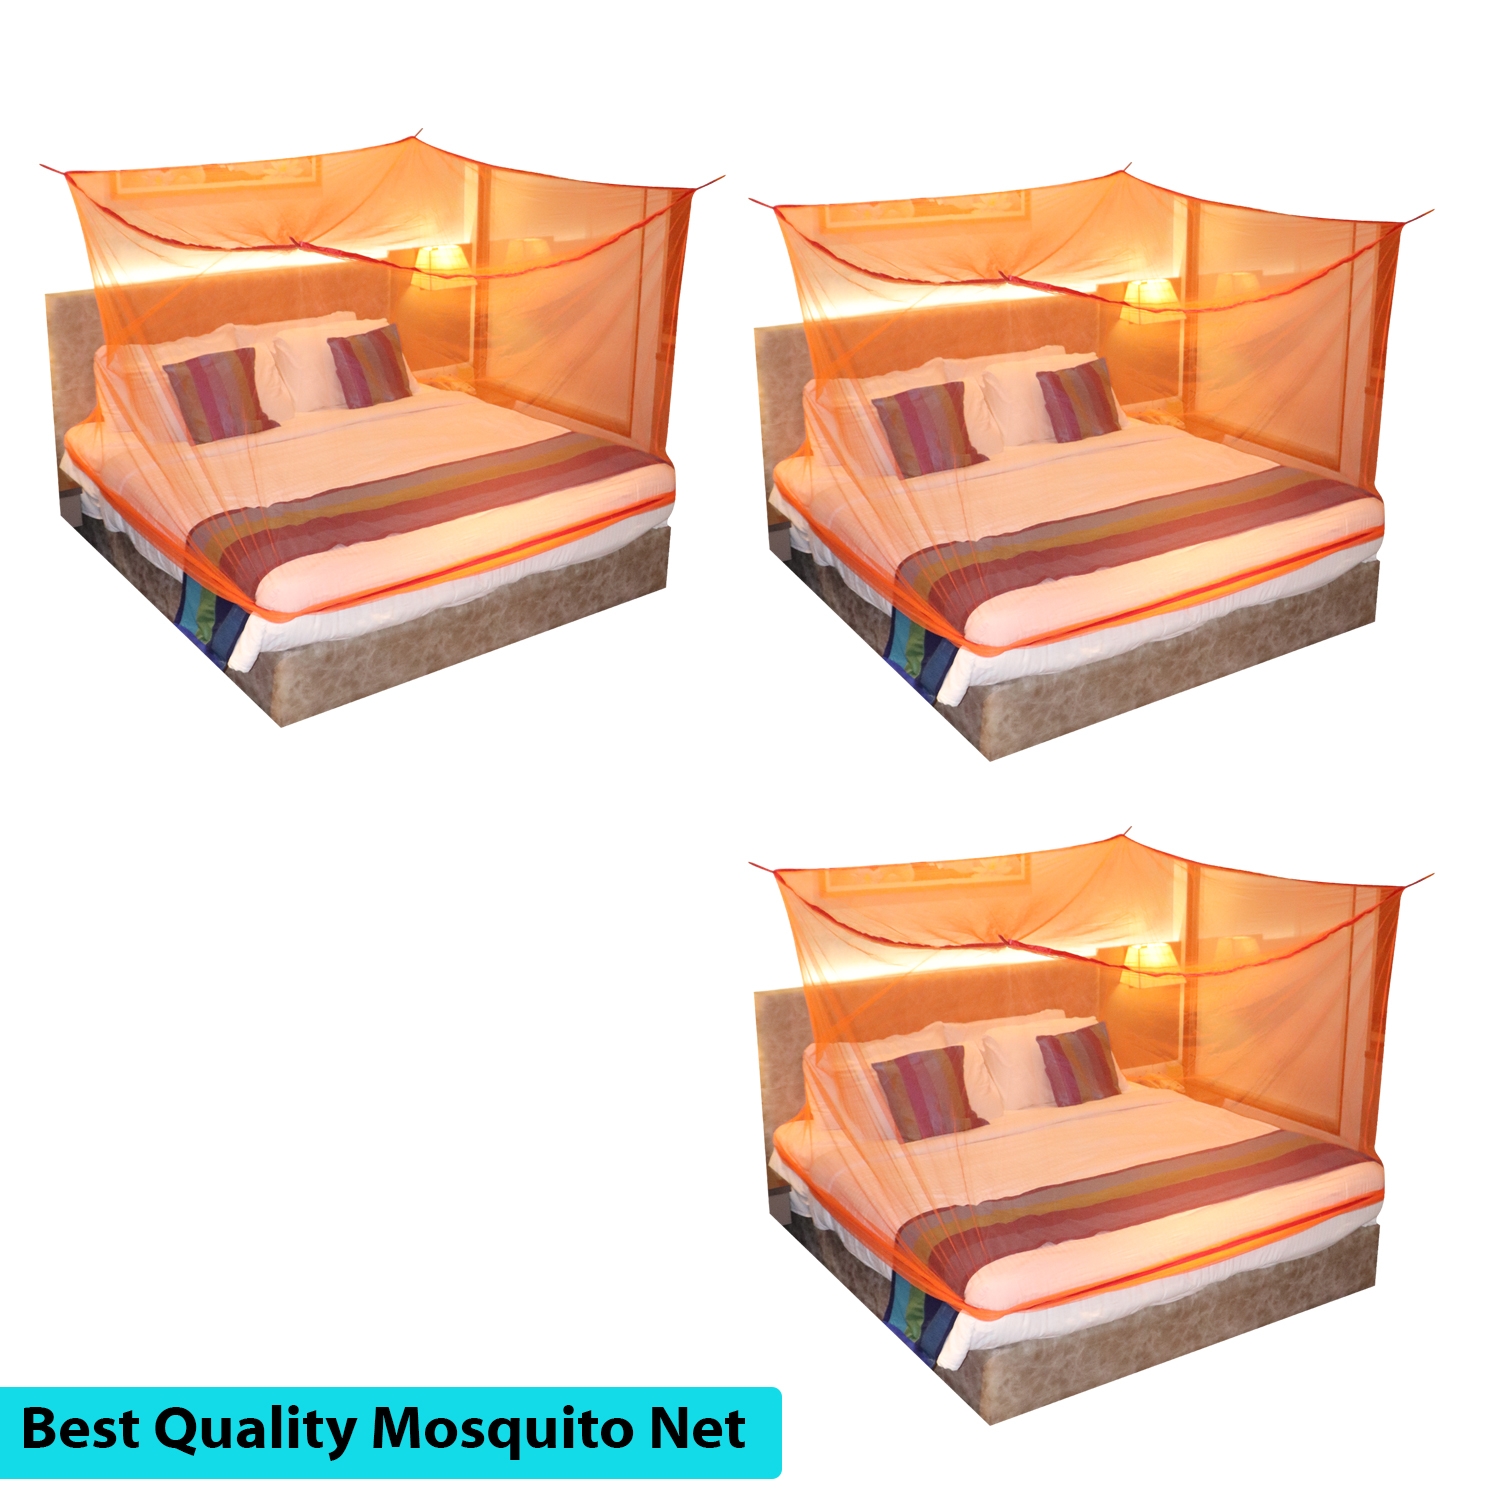 Paola Jewels | Mosquito Net for Double Bed, King-Size, Square Hanging Foldable Polyester Net OrangePack of 3